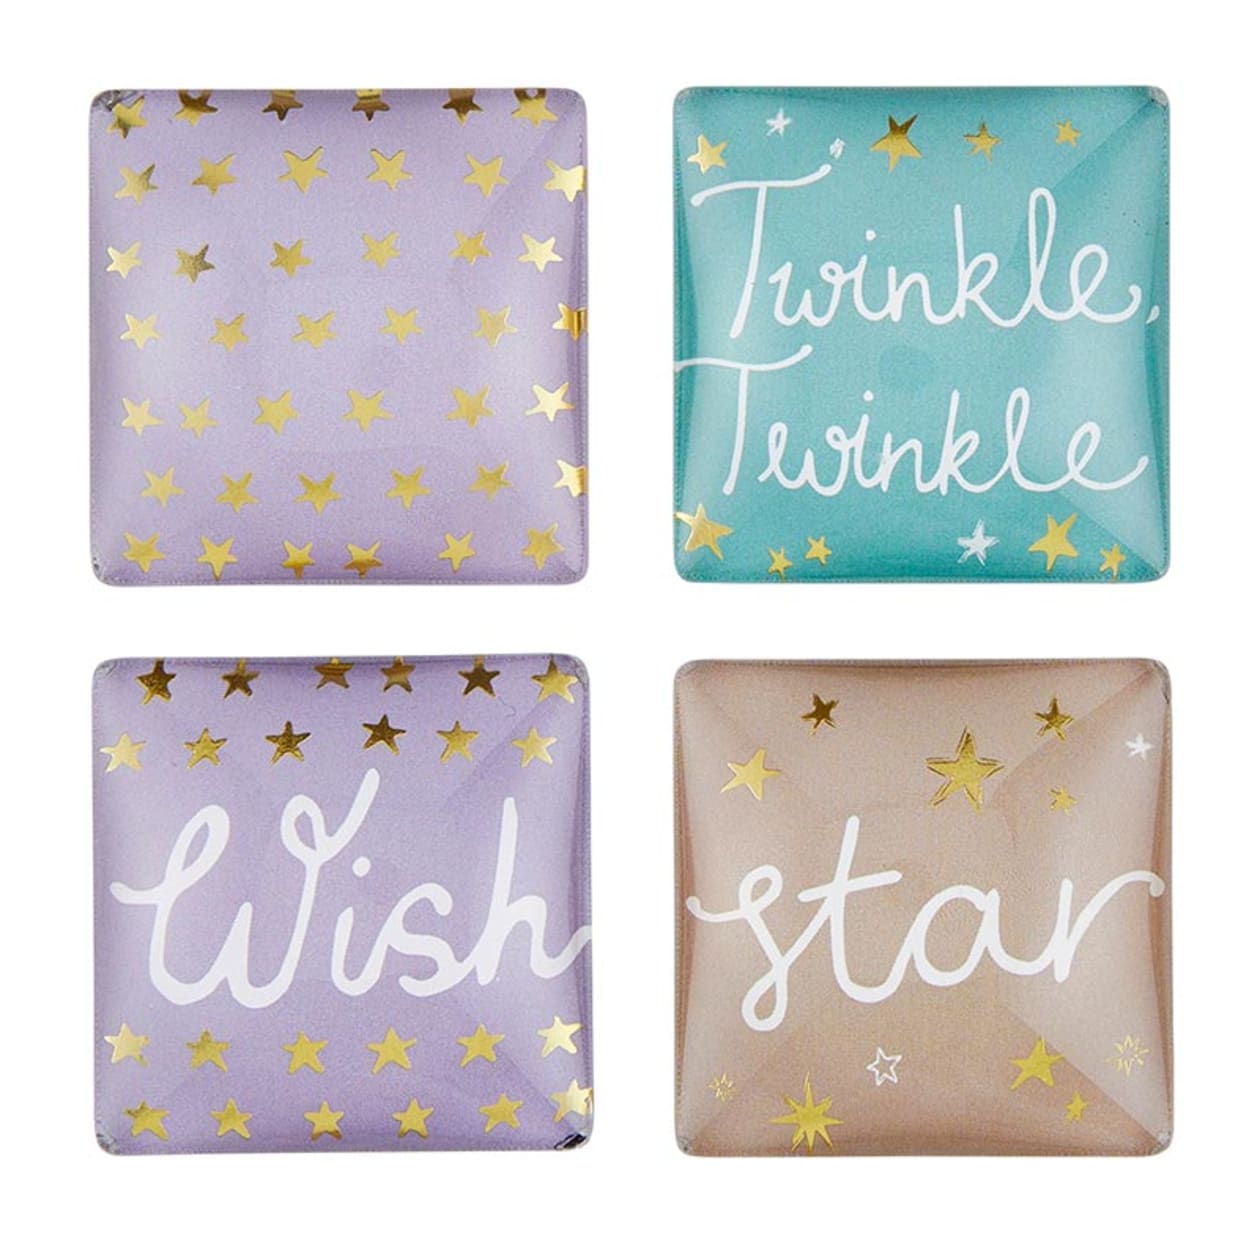 Wish Twinkle Square Glass Magnet Set | In a Gift Box